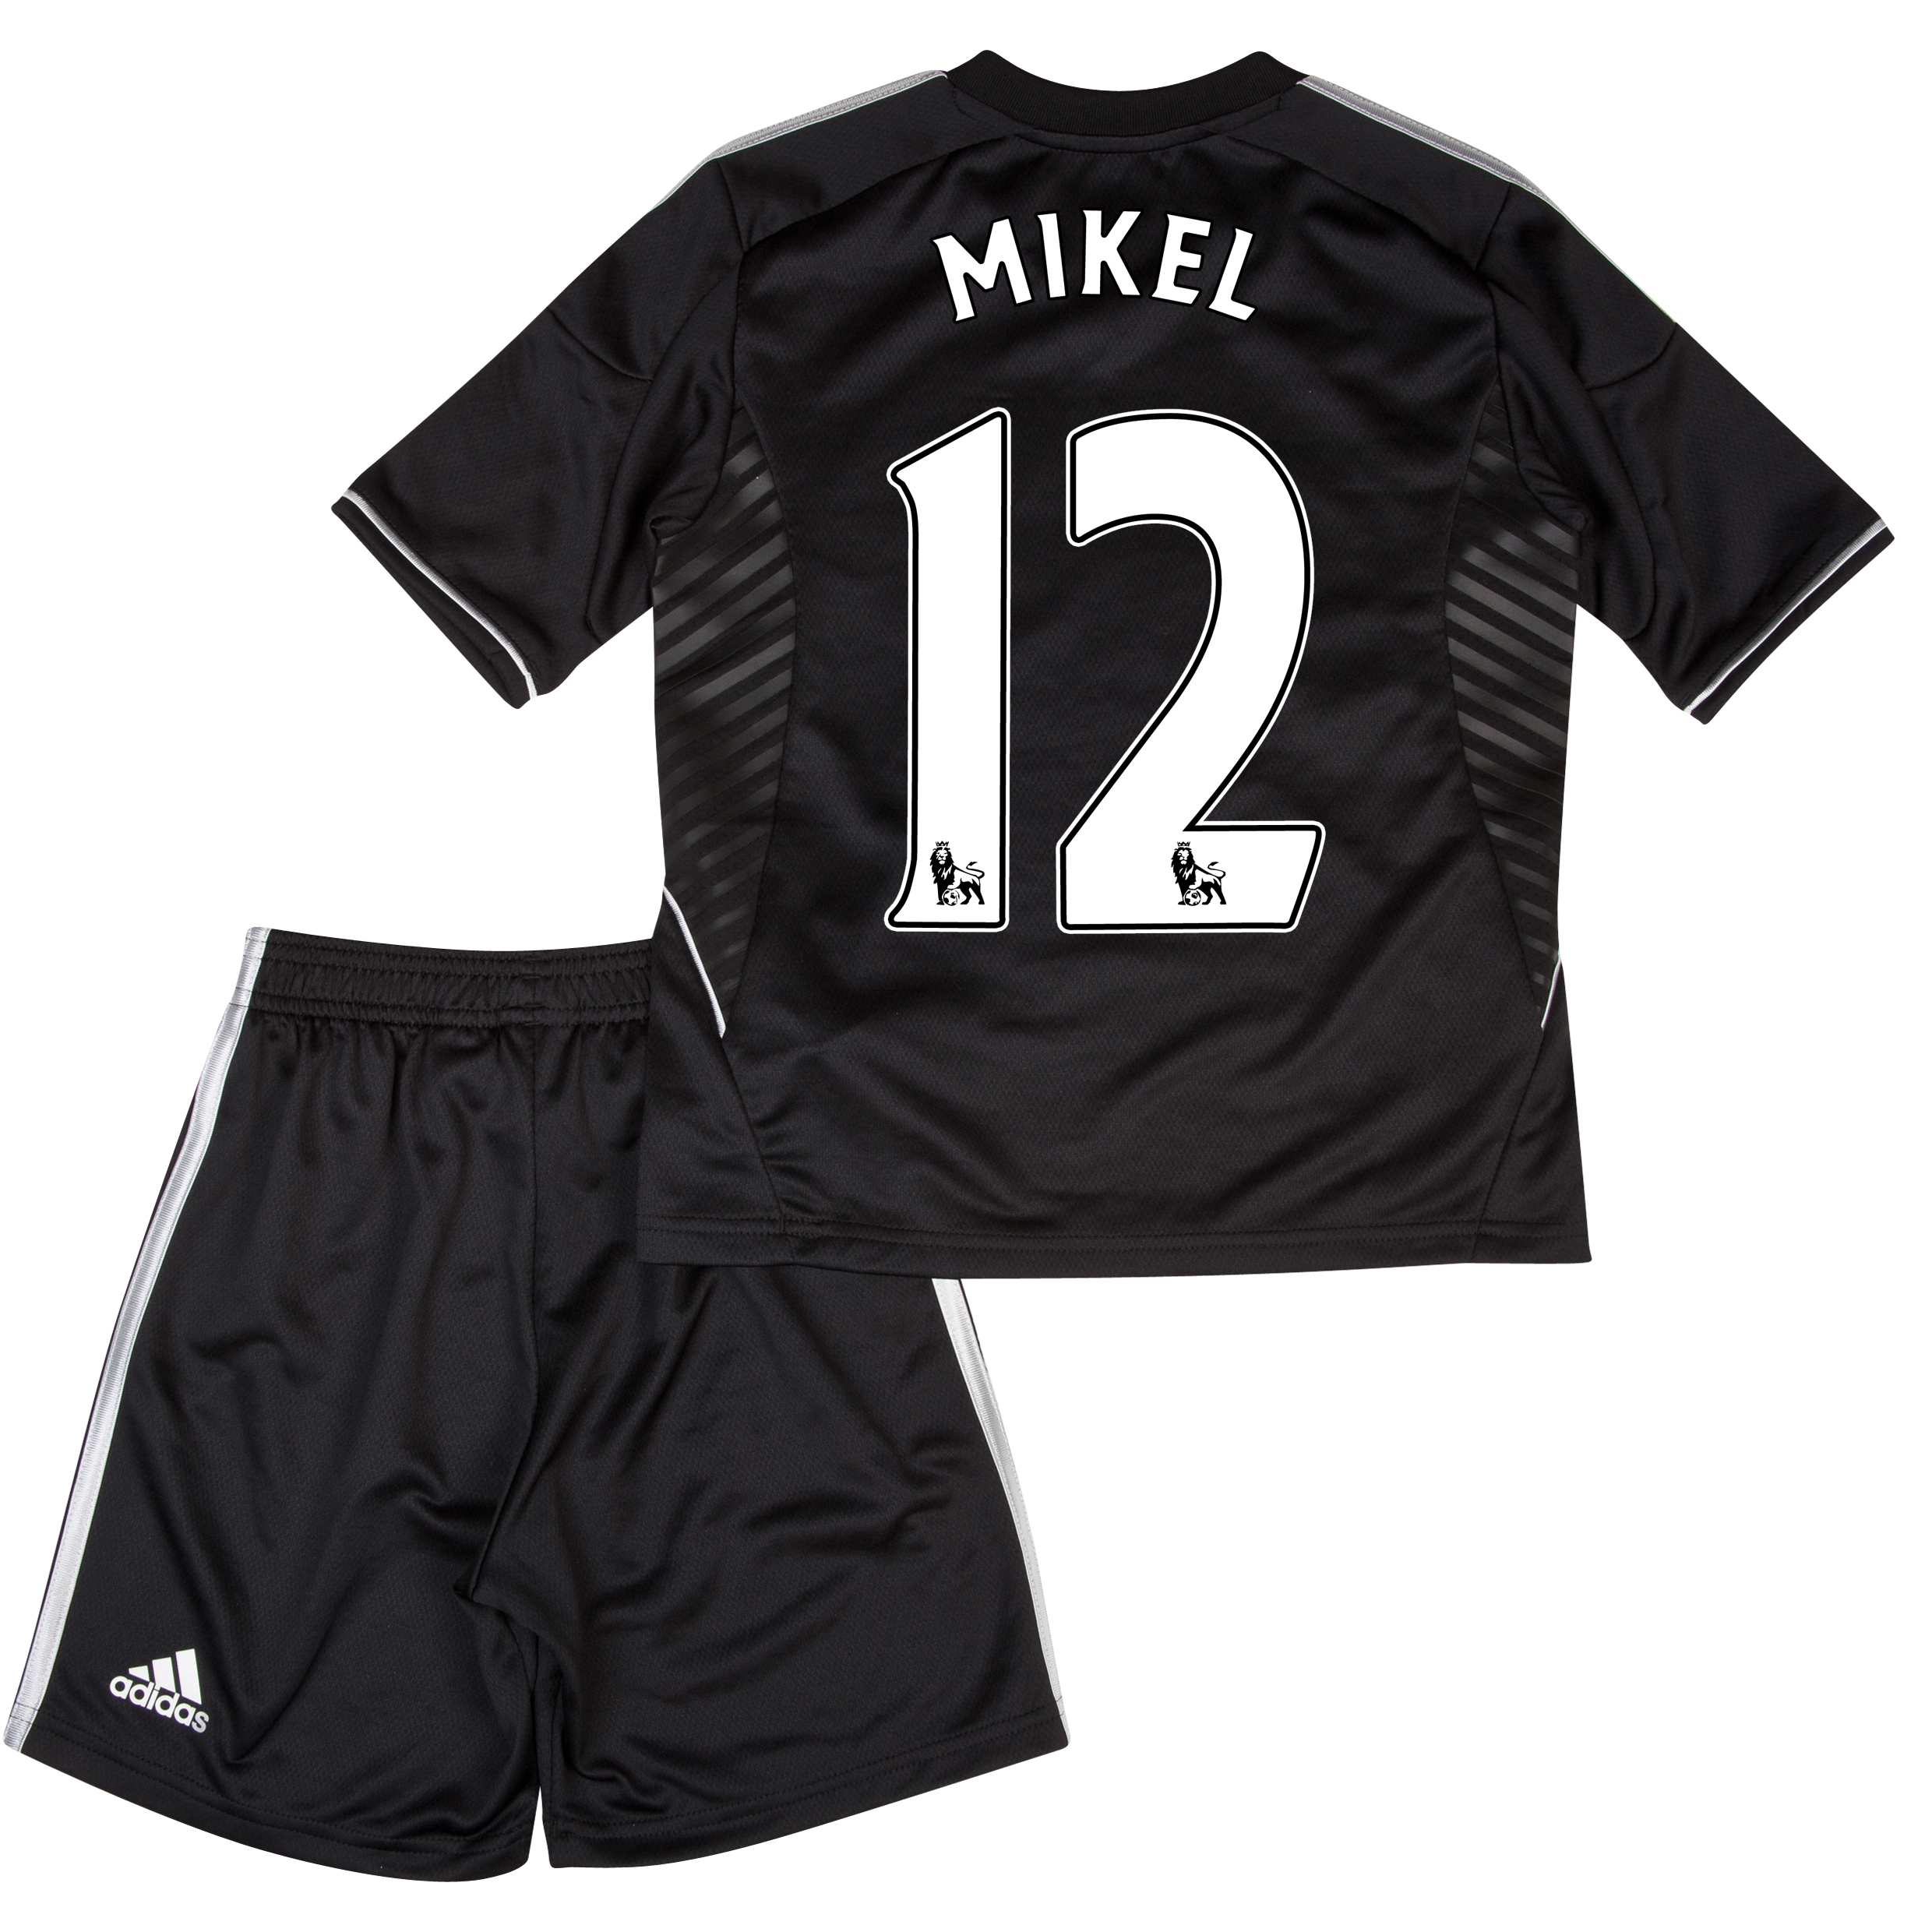 Chelsea Third Mini Kit 2013/14 with Mikel 12 printing